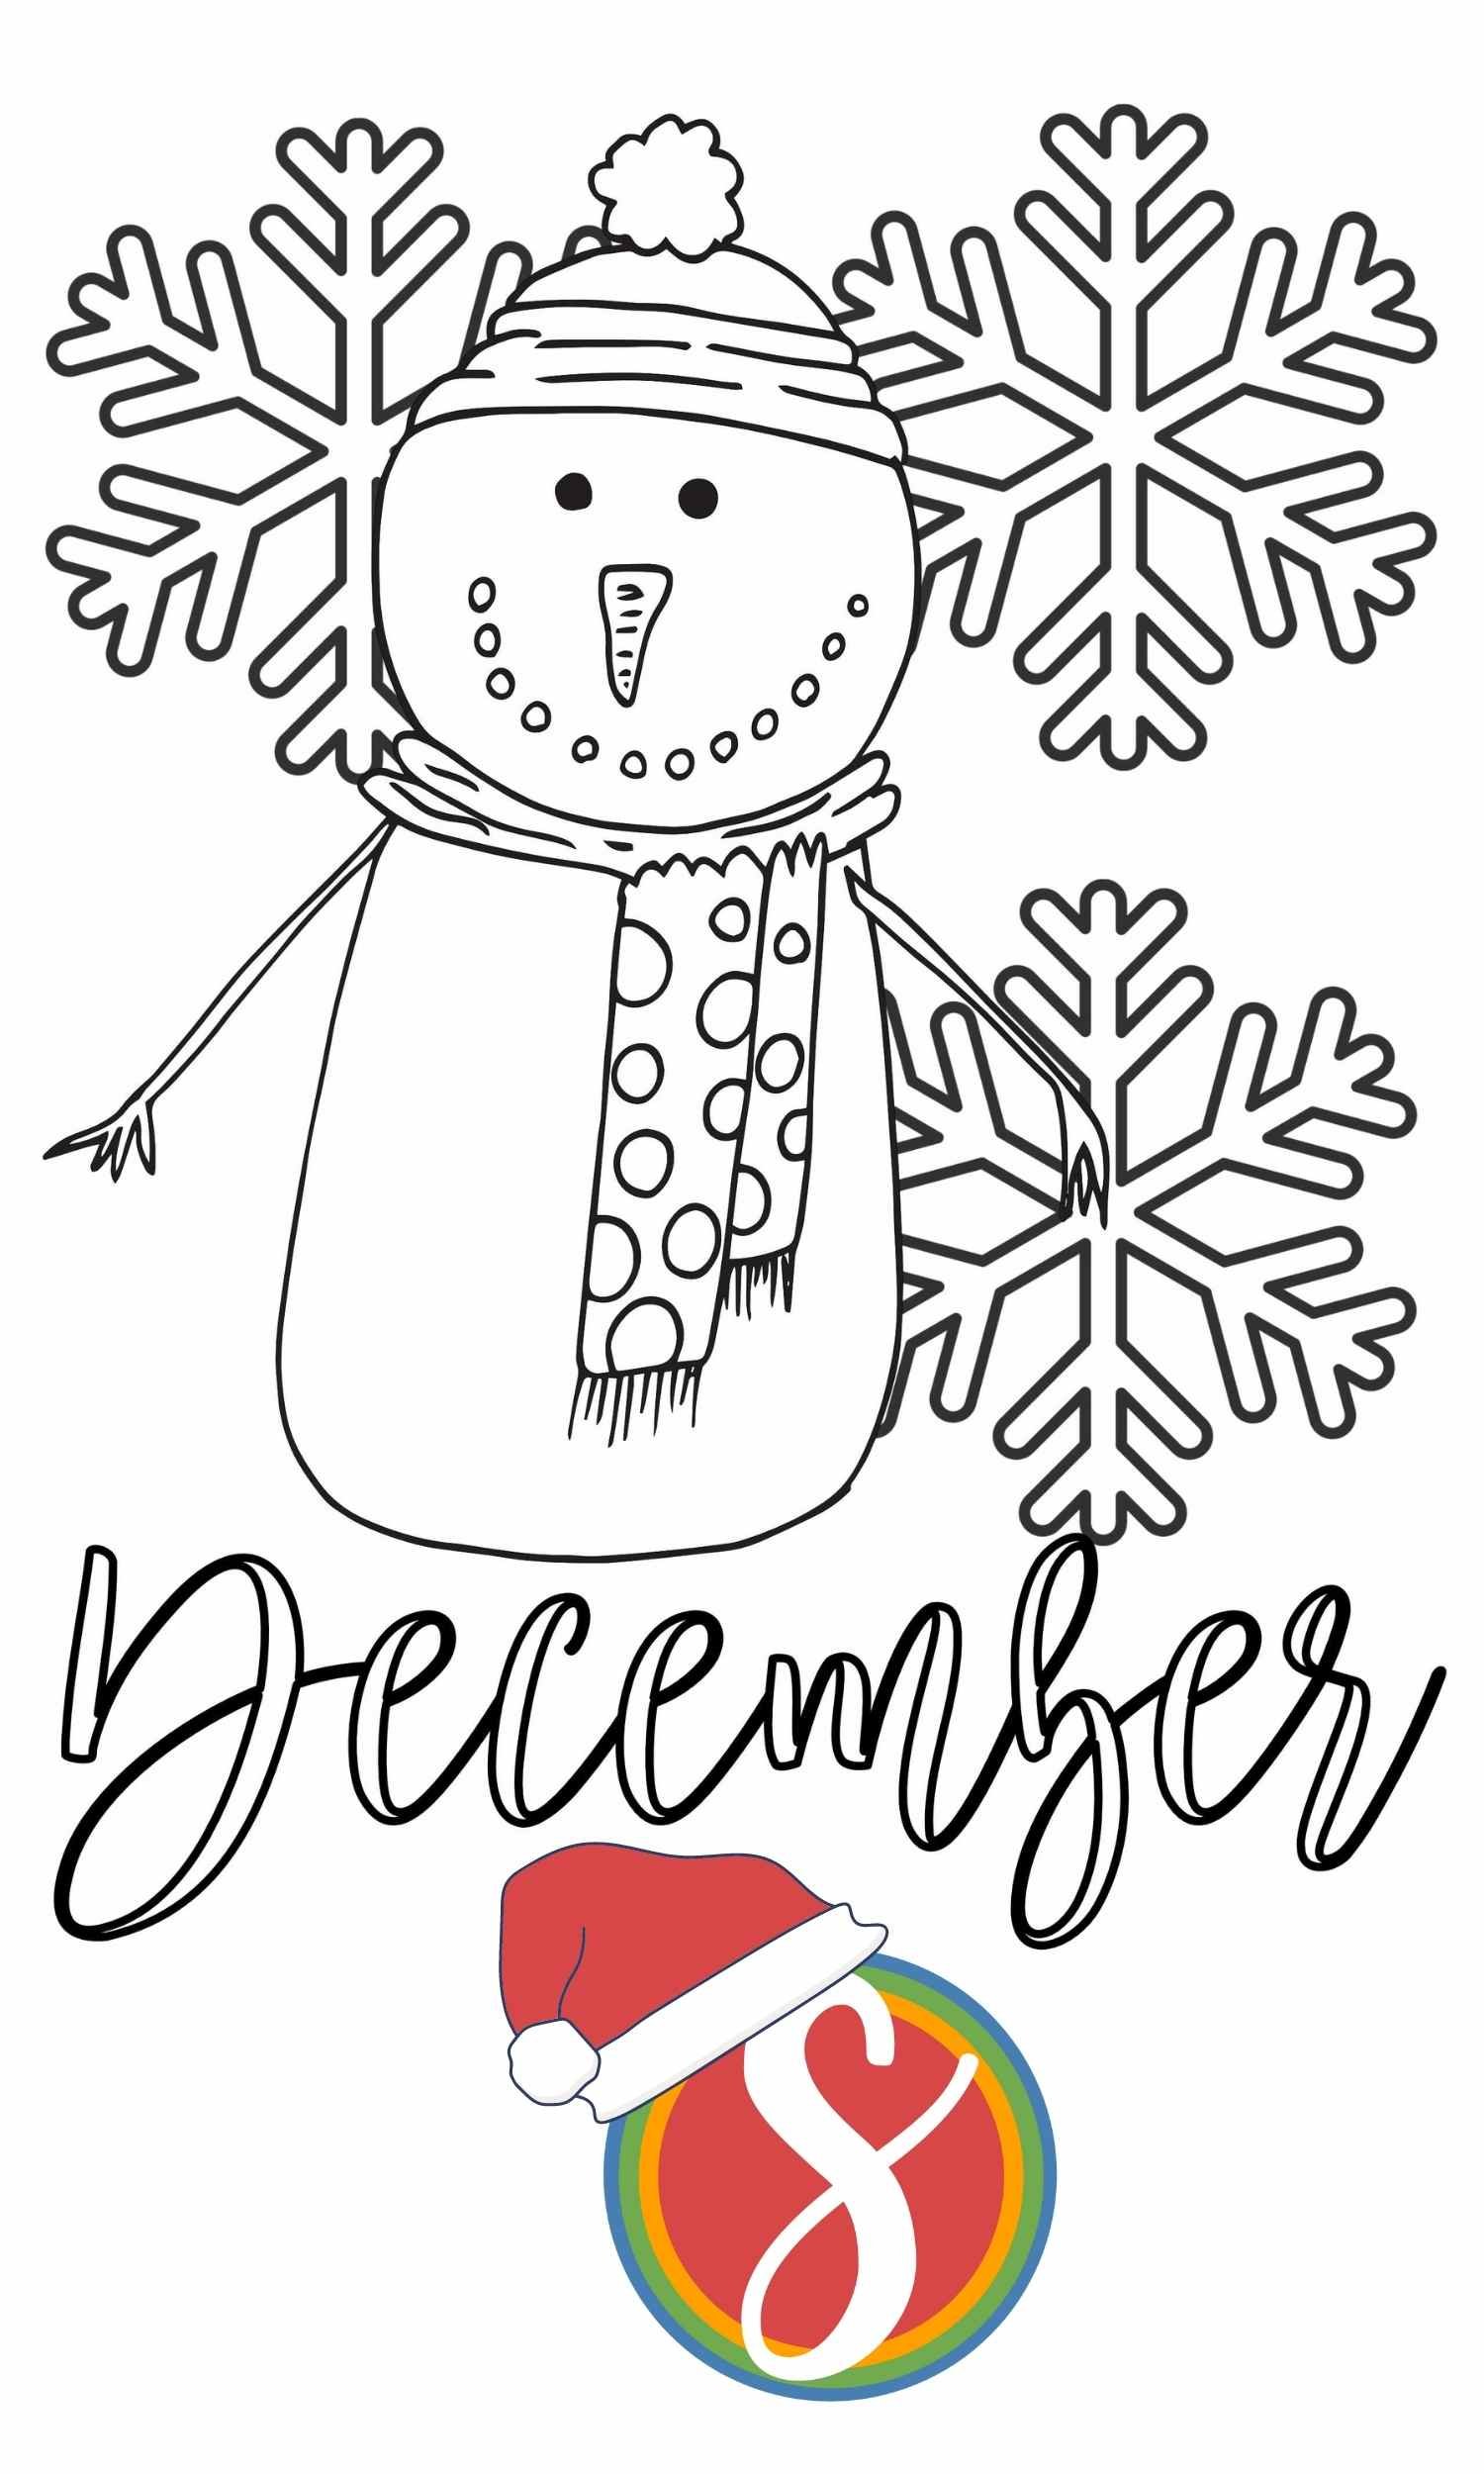 snowman to color with snowflakes, colorable word "December"